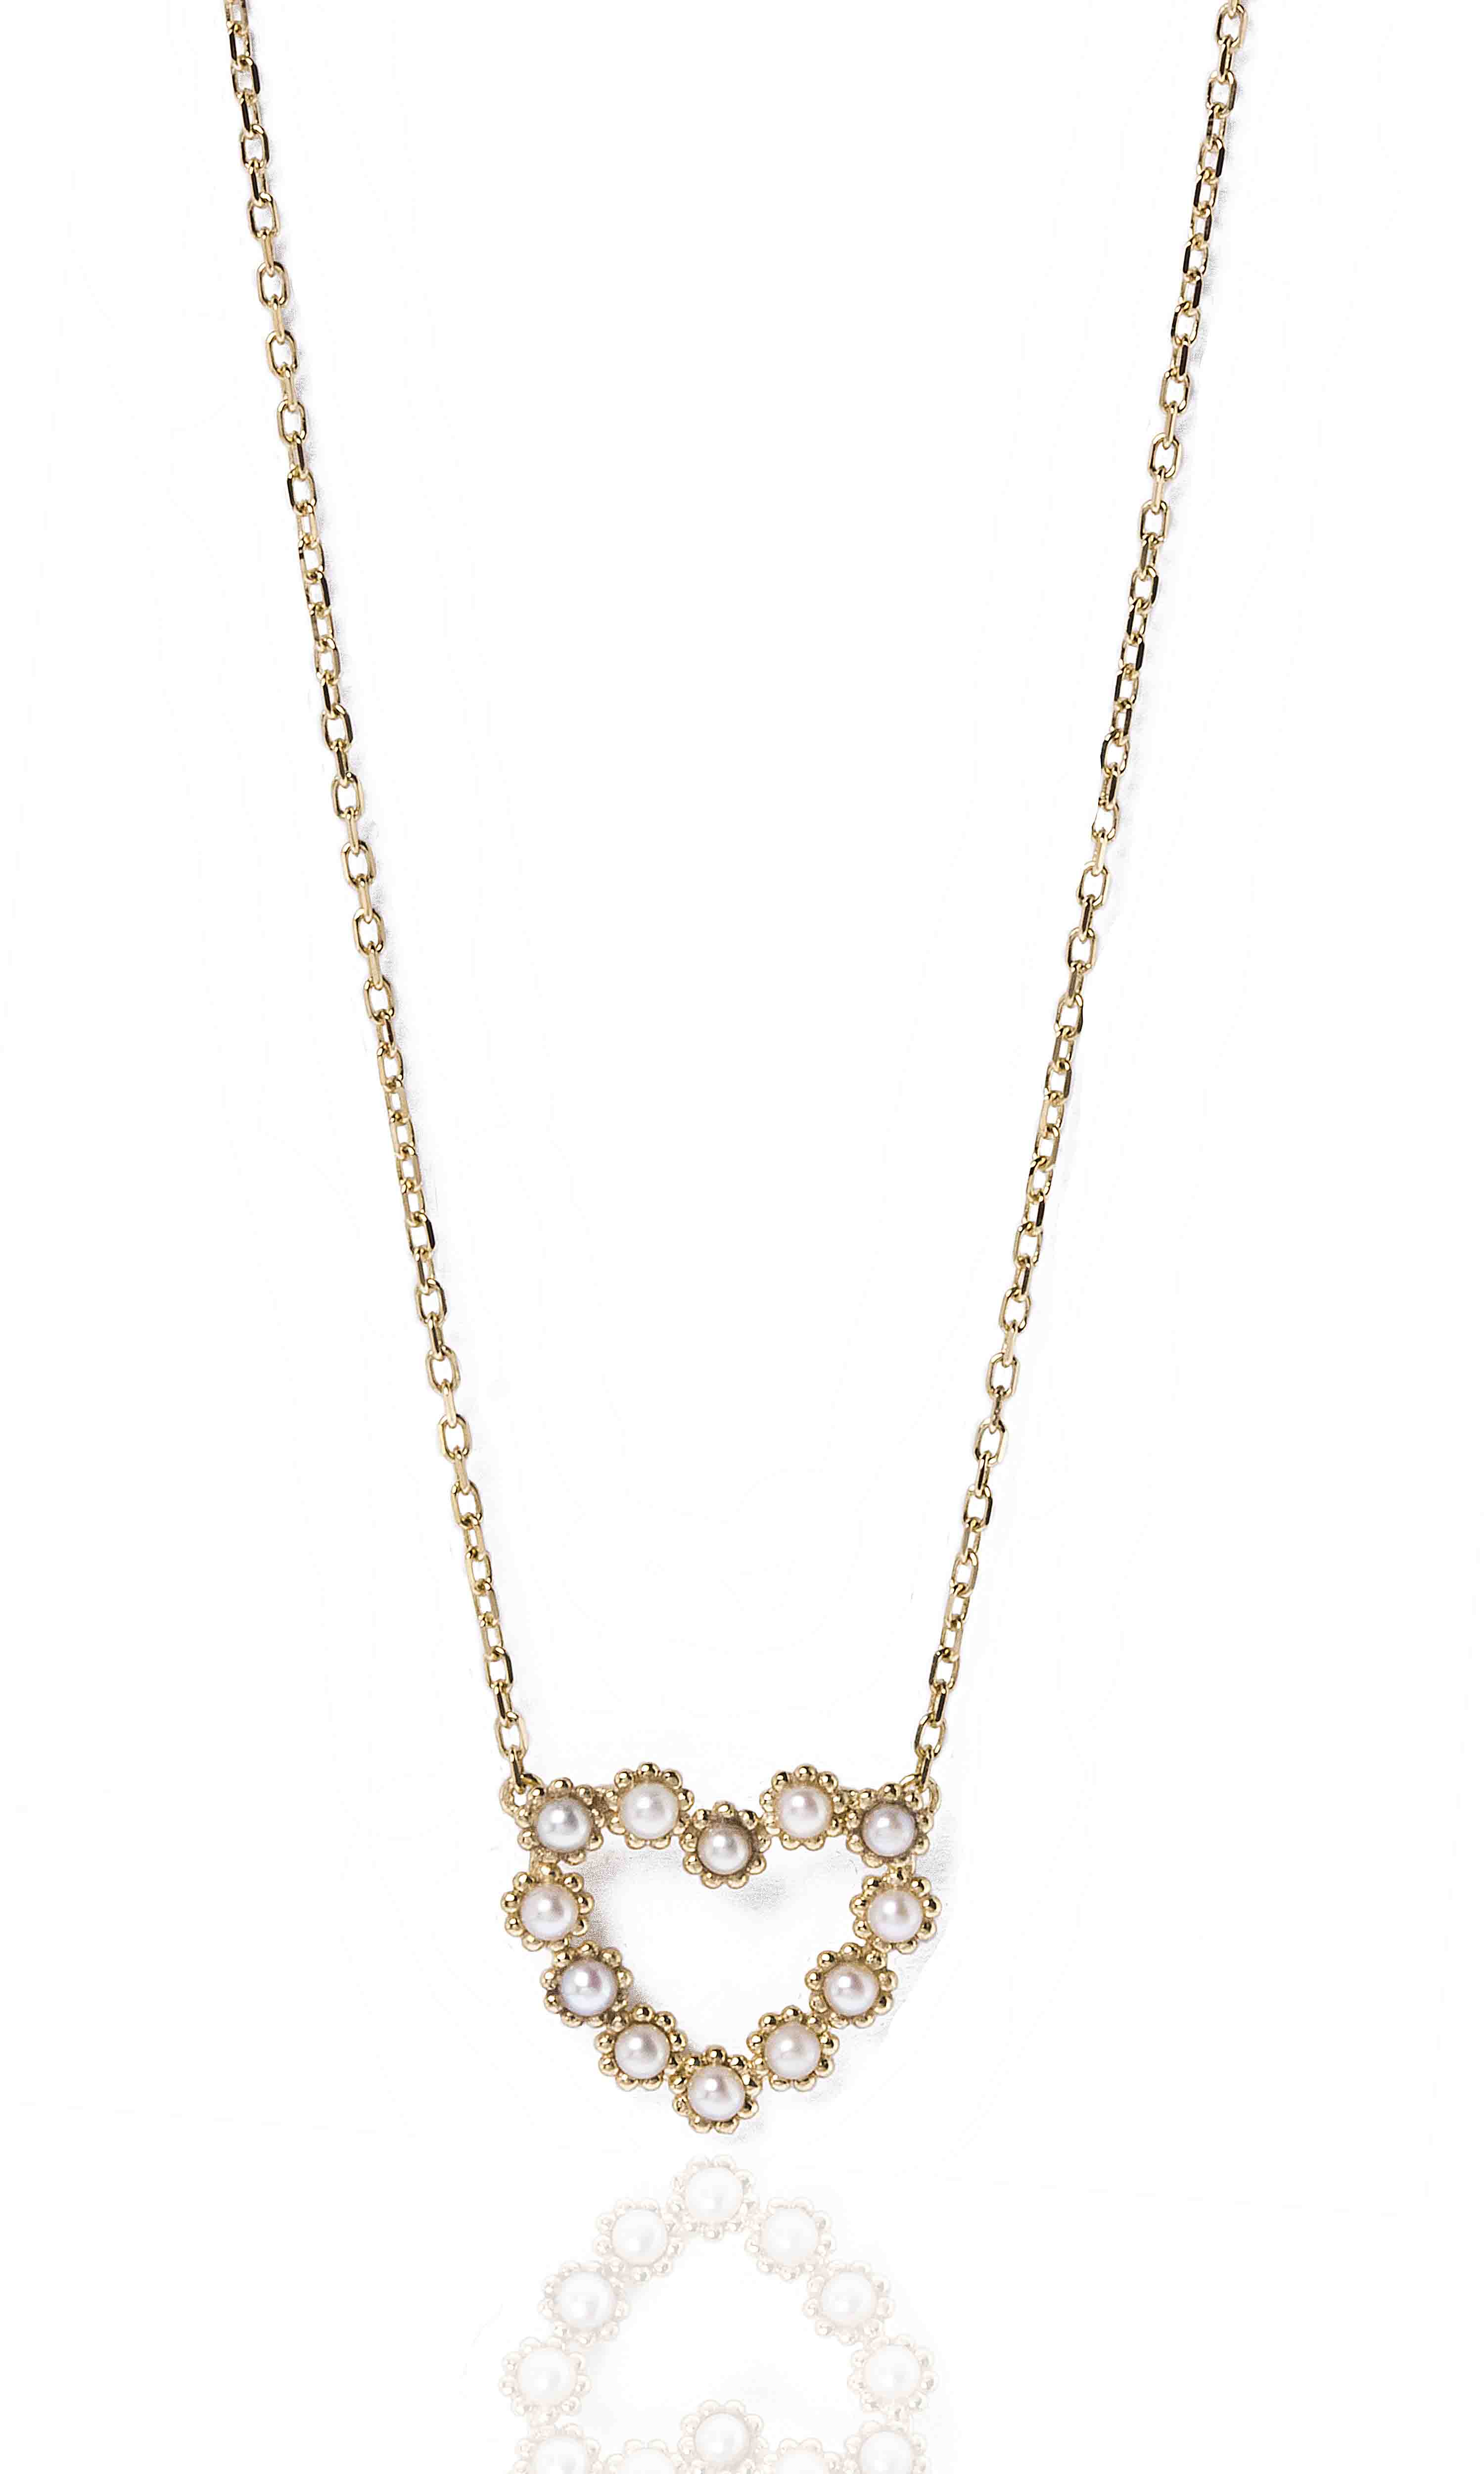 Gag Cora+º+úo Perolas O.A. - Heart Necklace with pearls in yellow gold